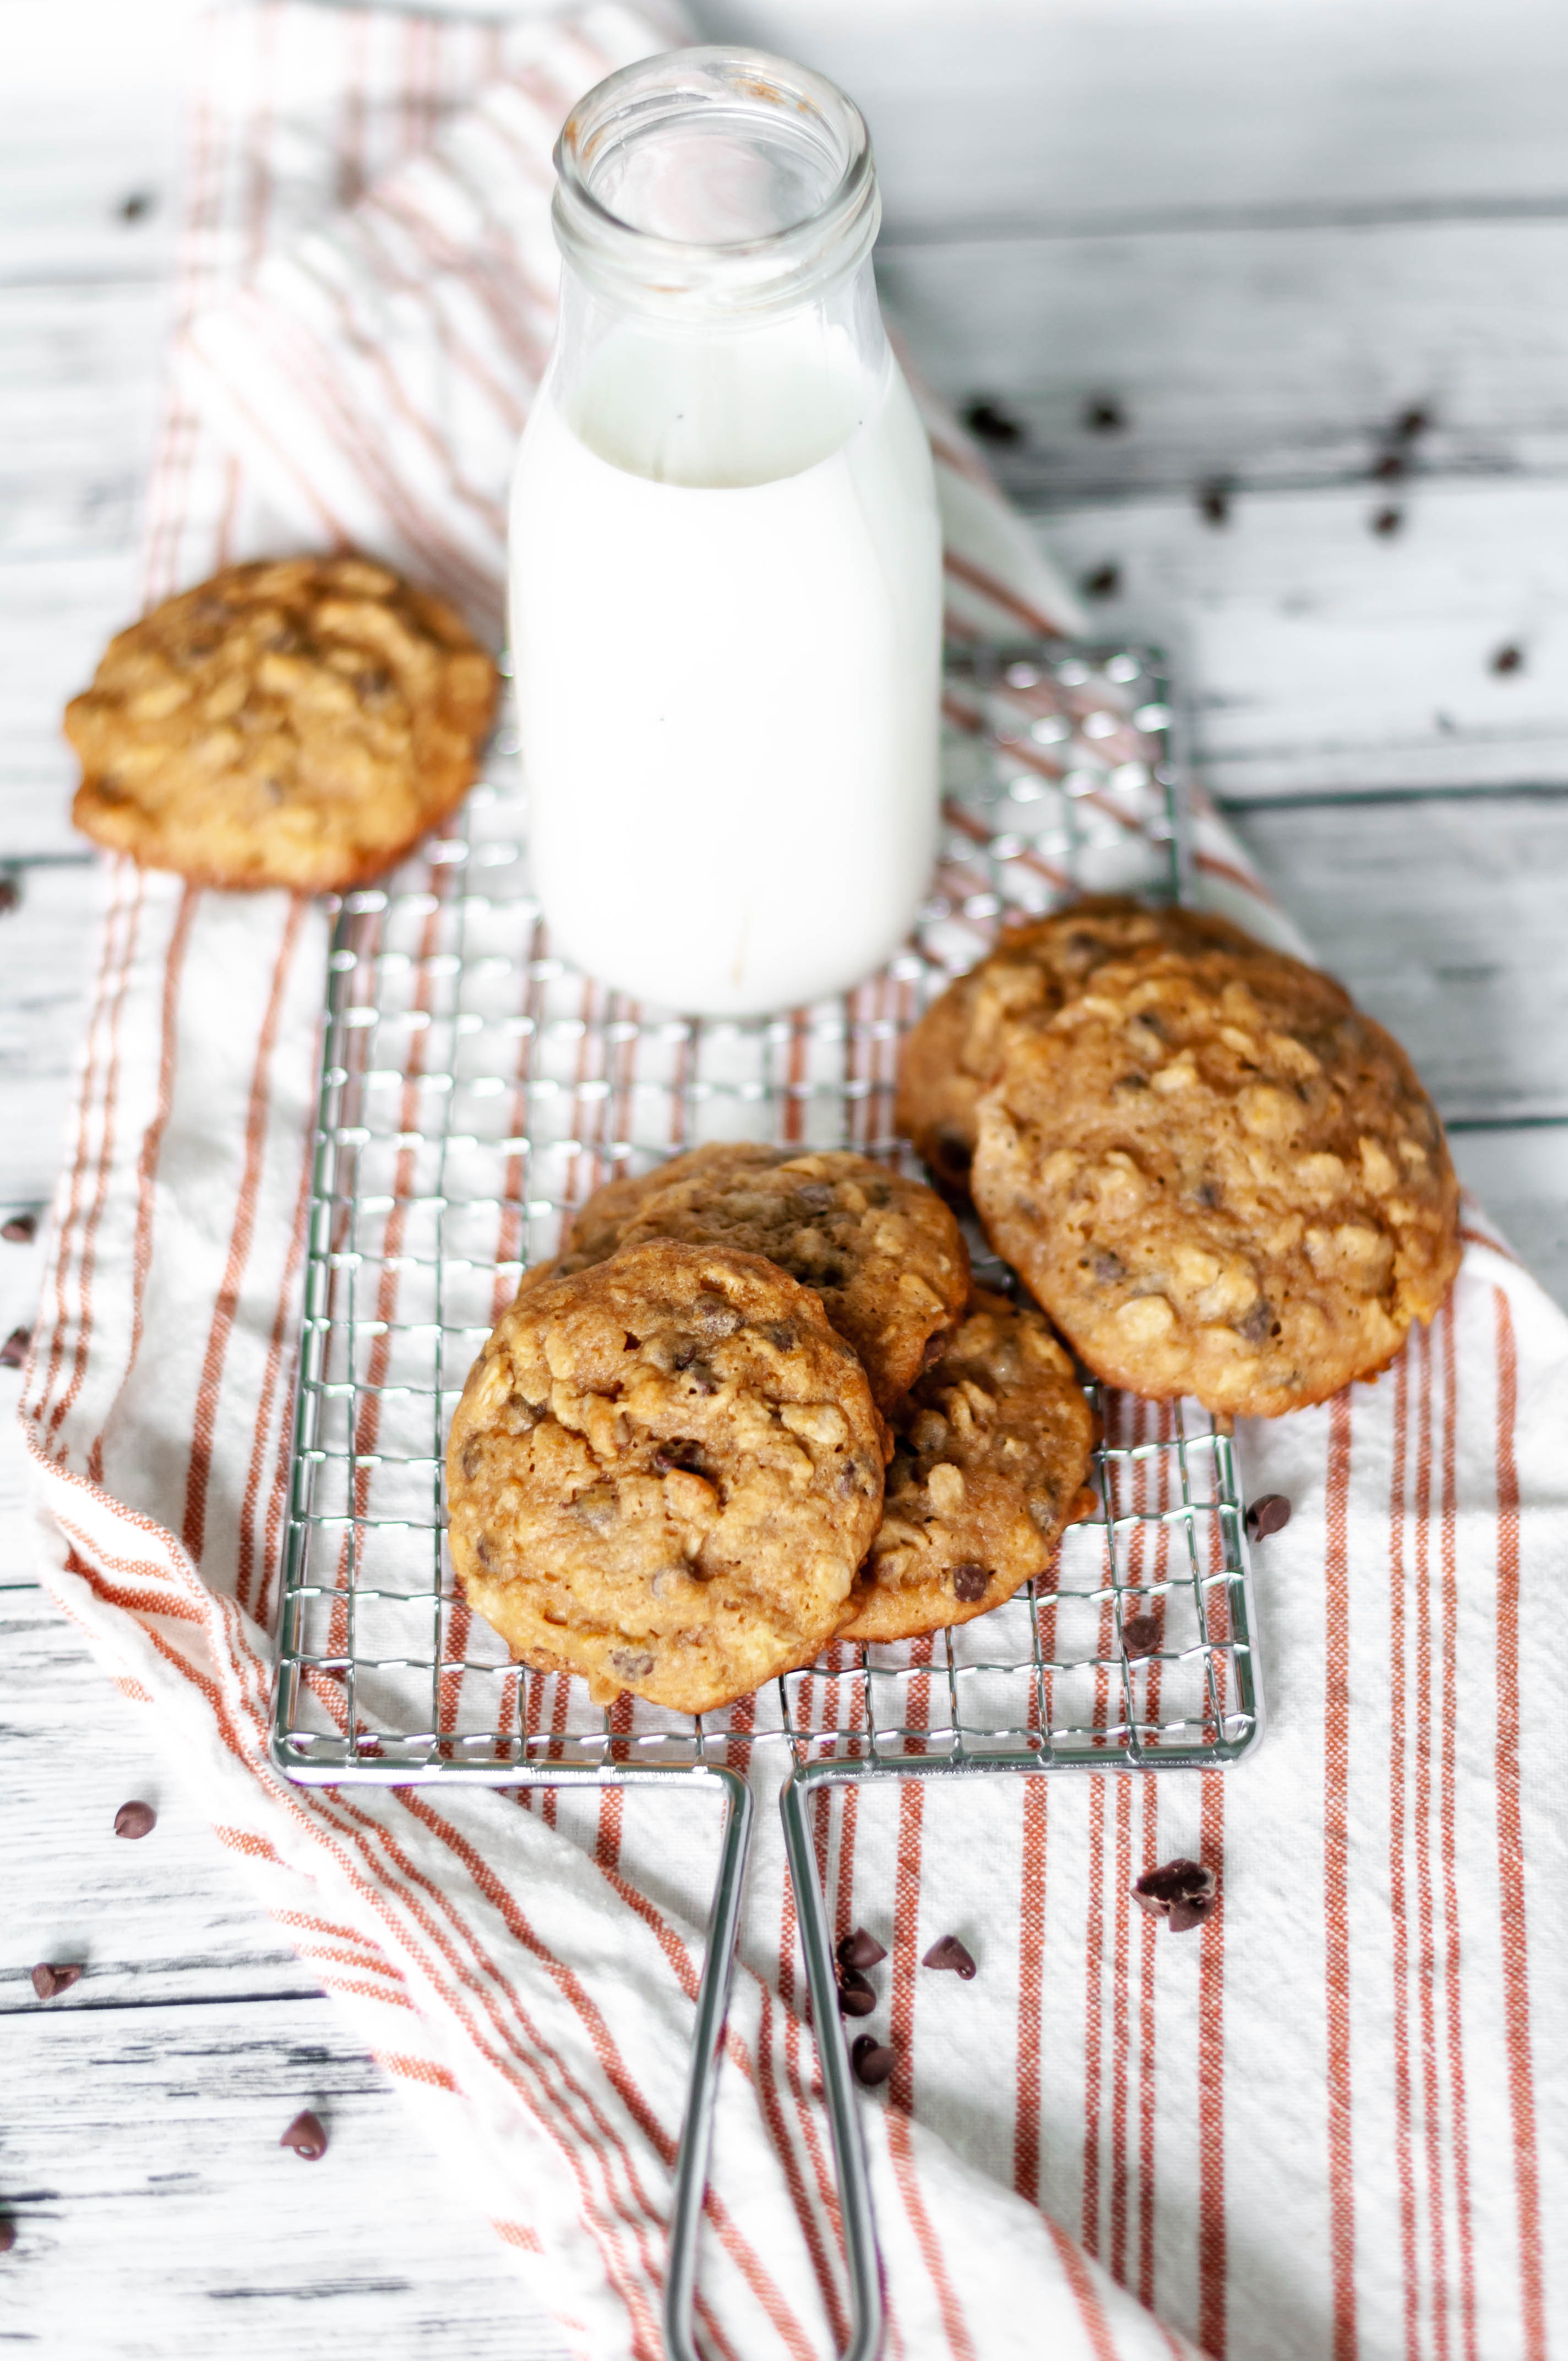 Pumpkin Oatmeal Cookies are super soft and chewy. Filled with warm pumpkin and spices, oatmeal and mini chocolate chips. The perfect fall dessert.